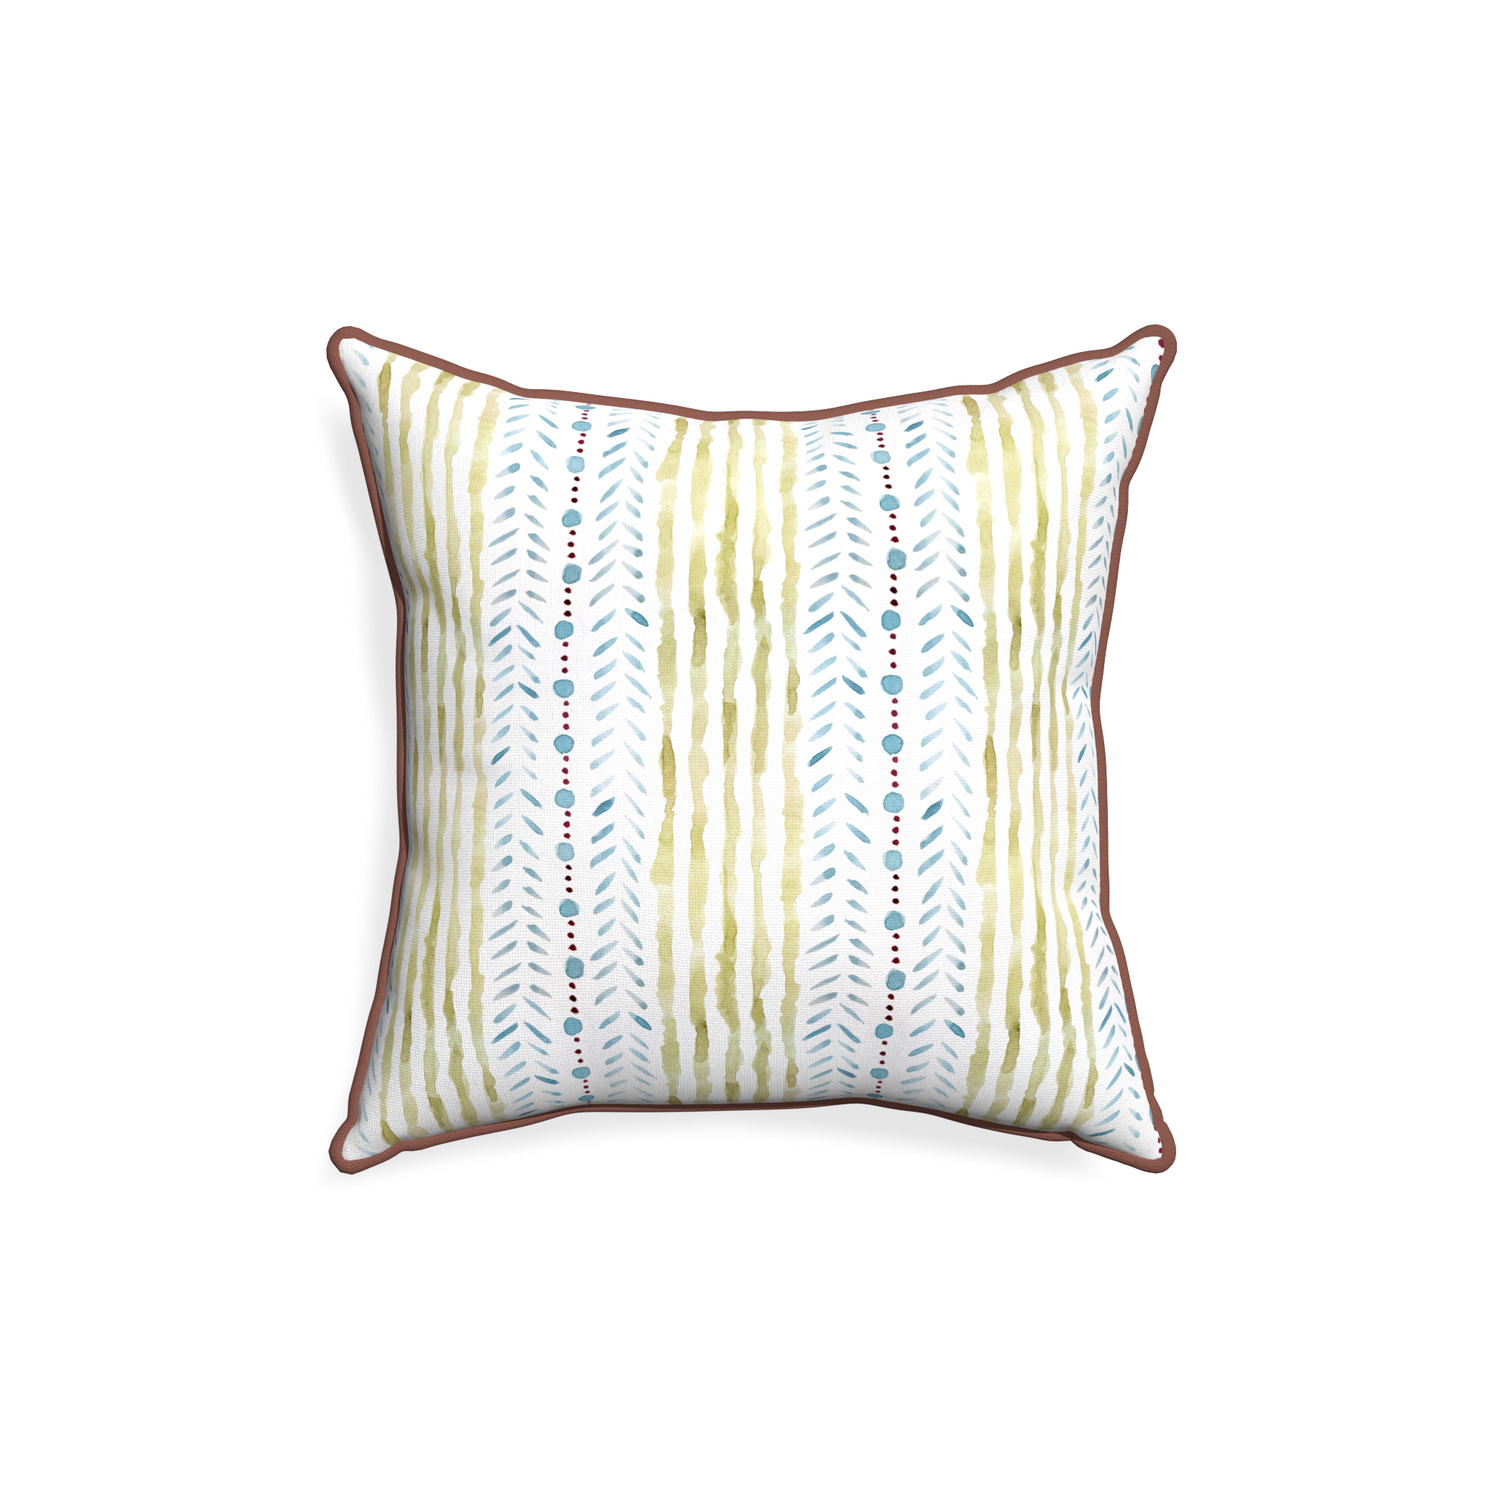 18-square julia custom blue & green stripedpillow with w piping on white background